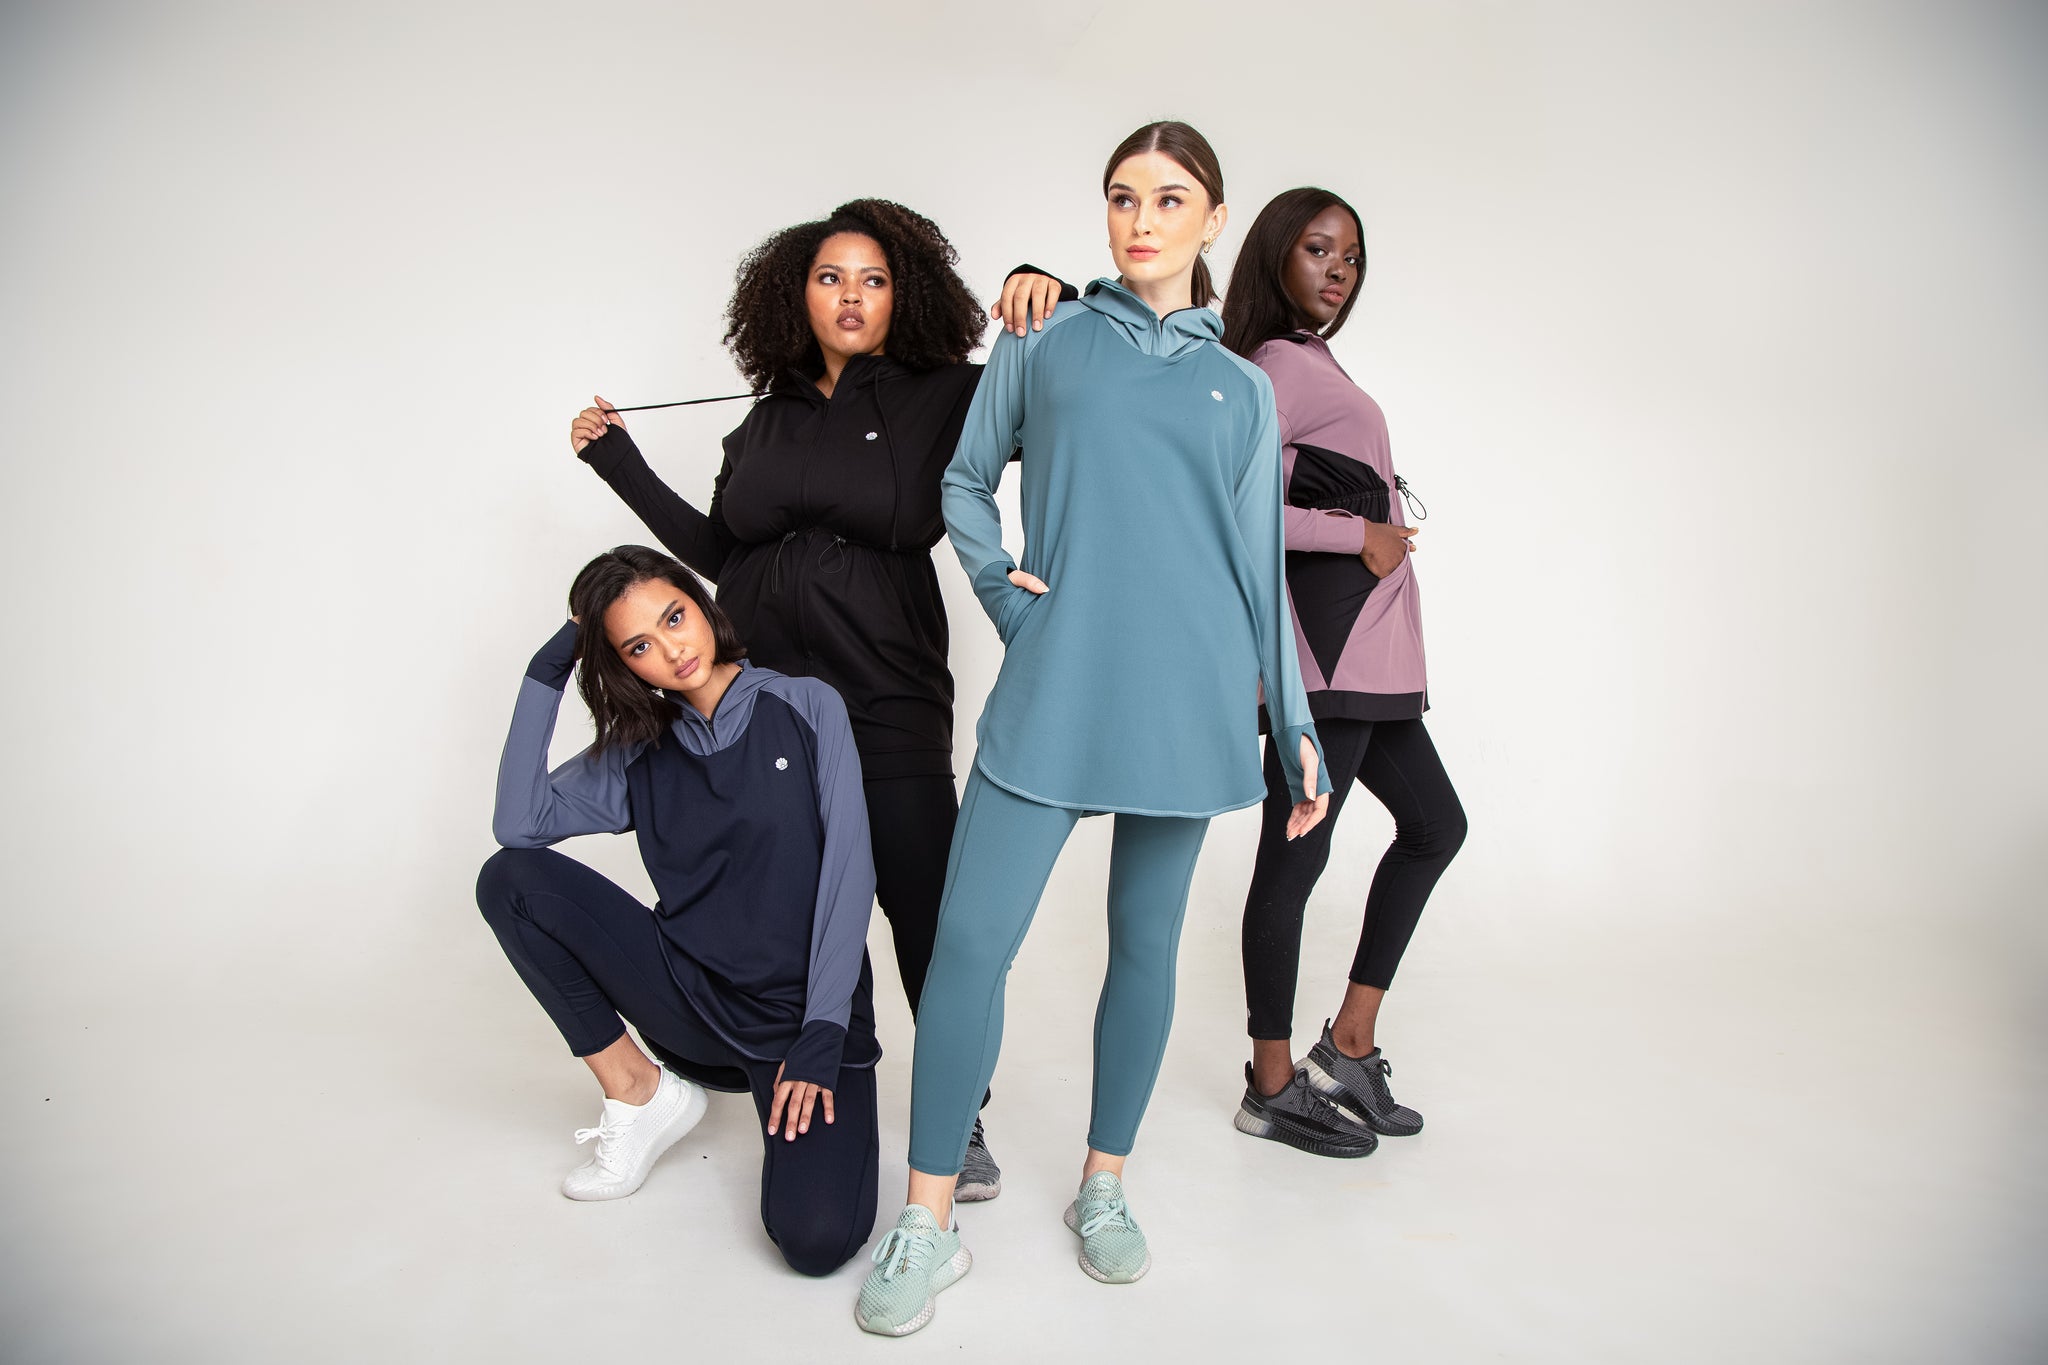 Leia, Modest Activewear for the Modern Woman